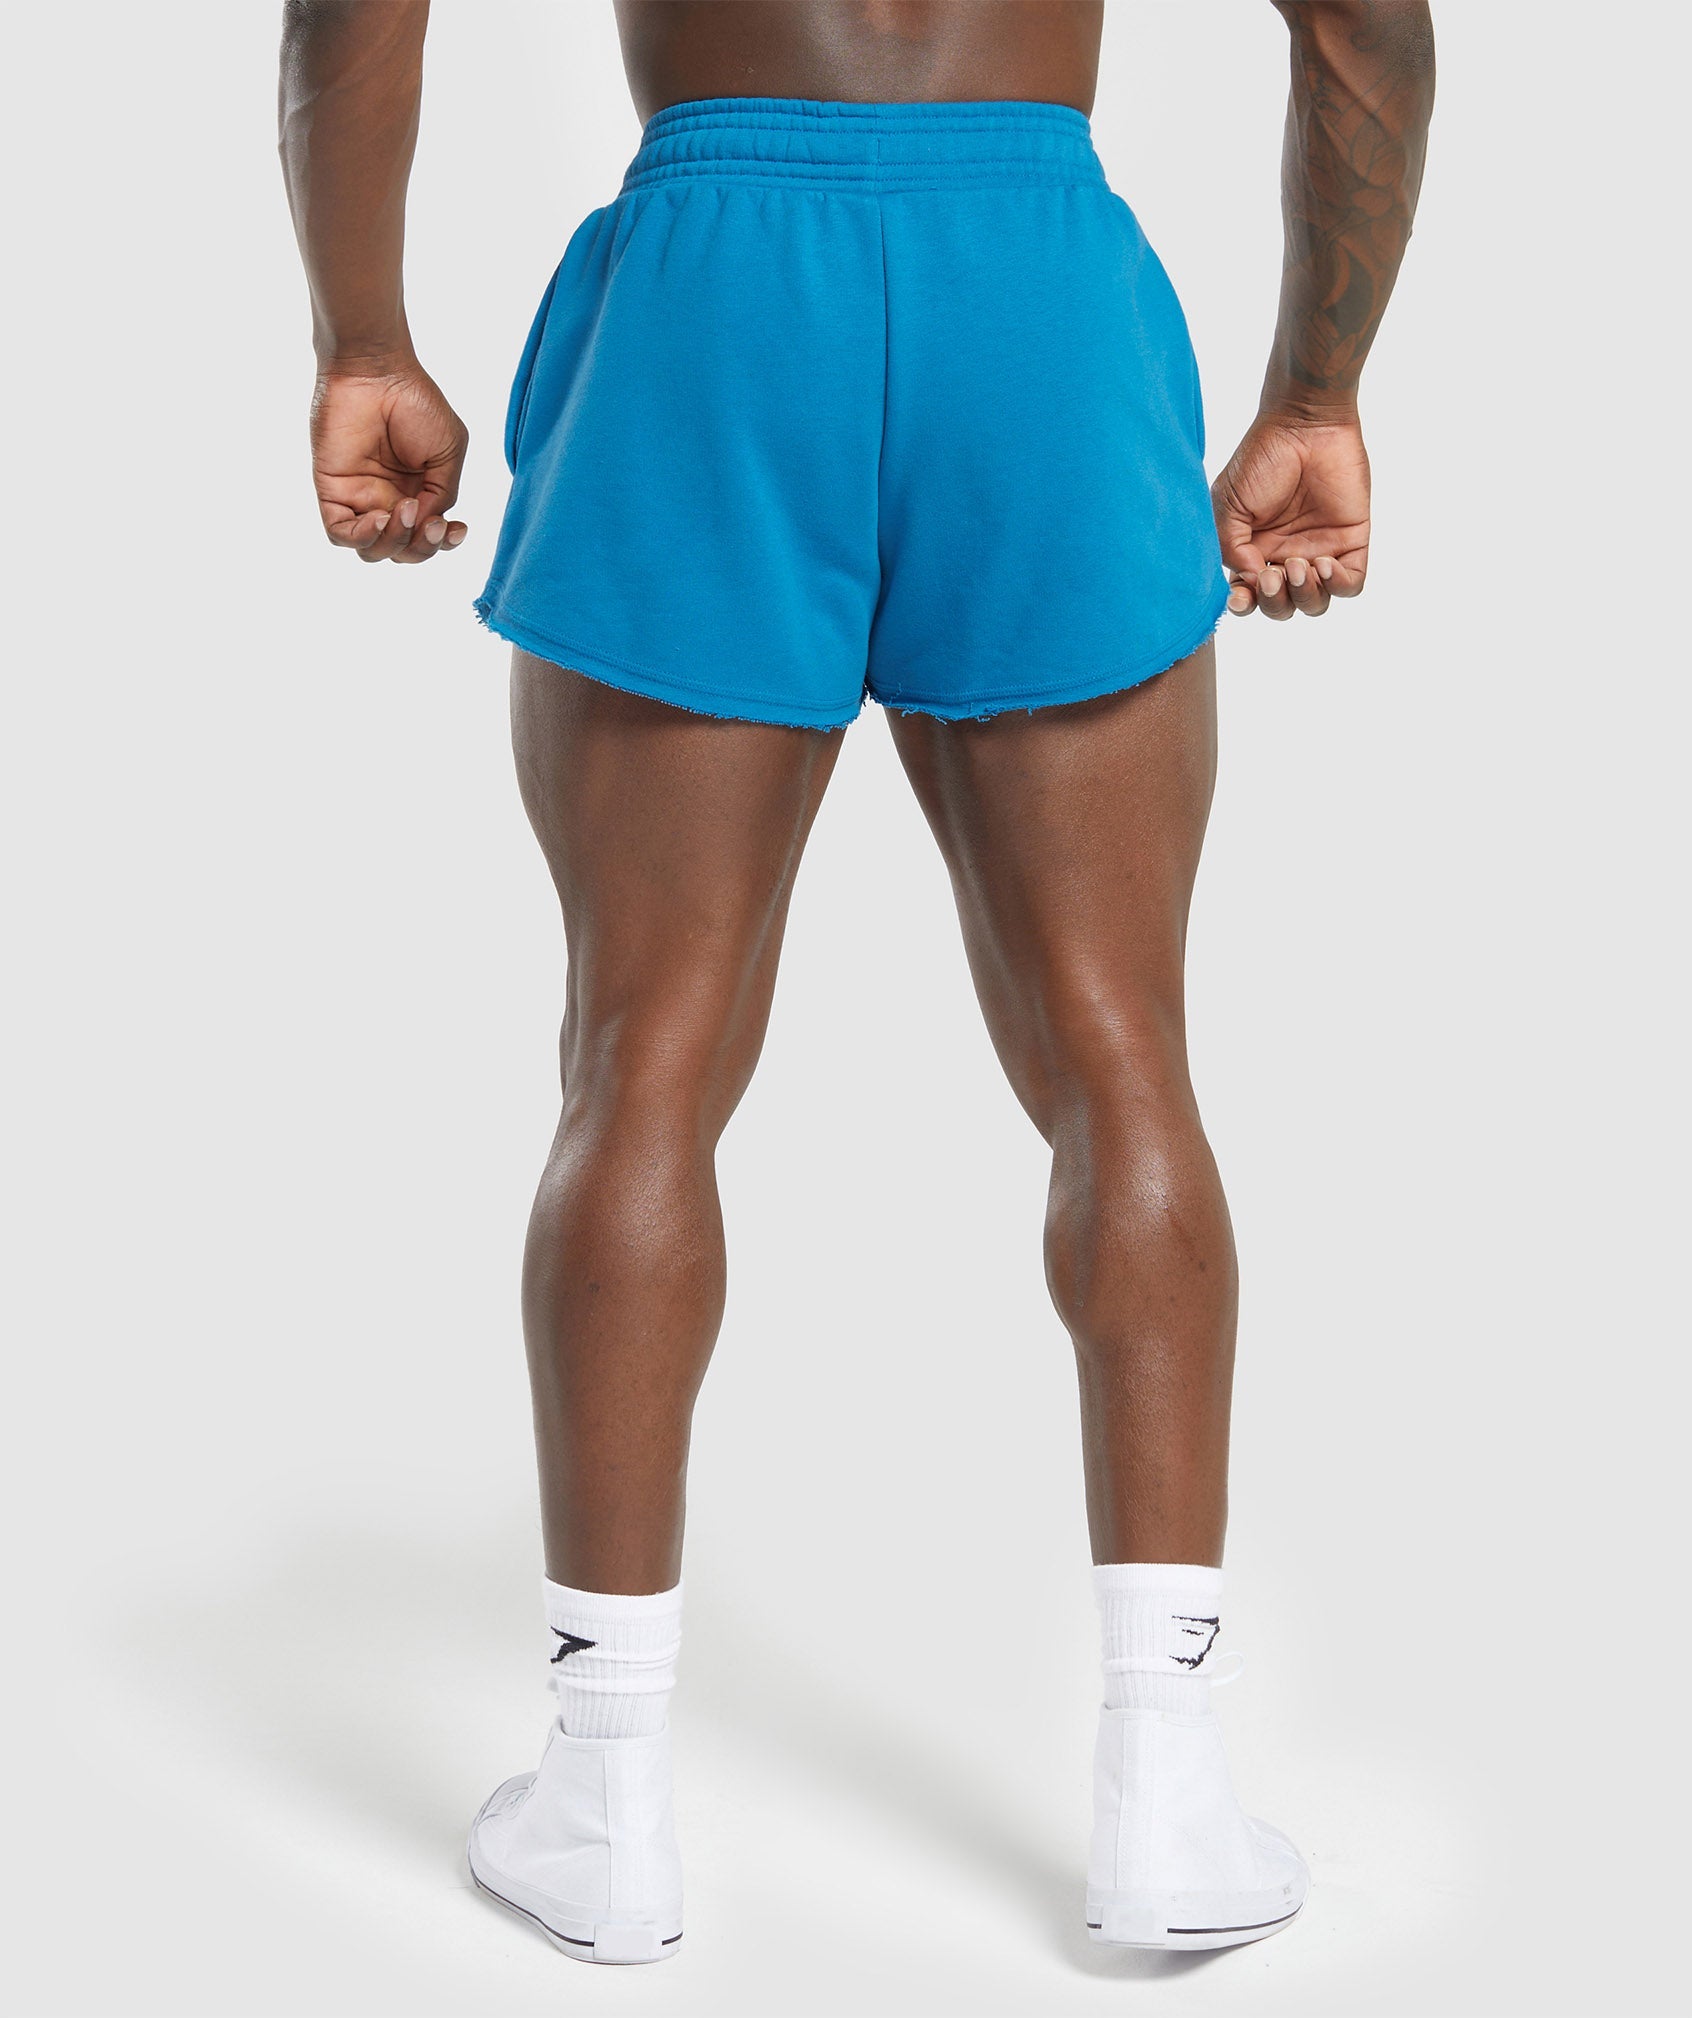 Legacy 4" Shorts in Retro Blue - view 2